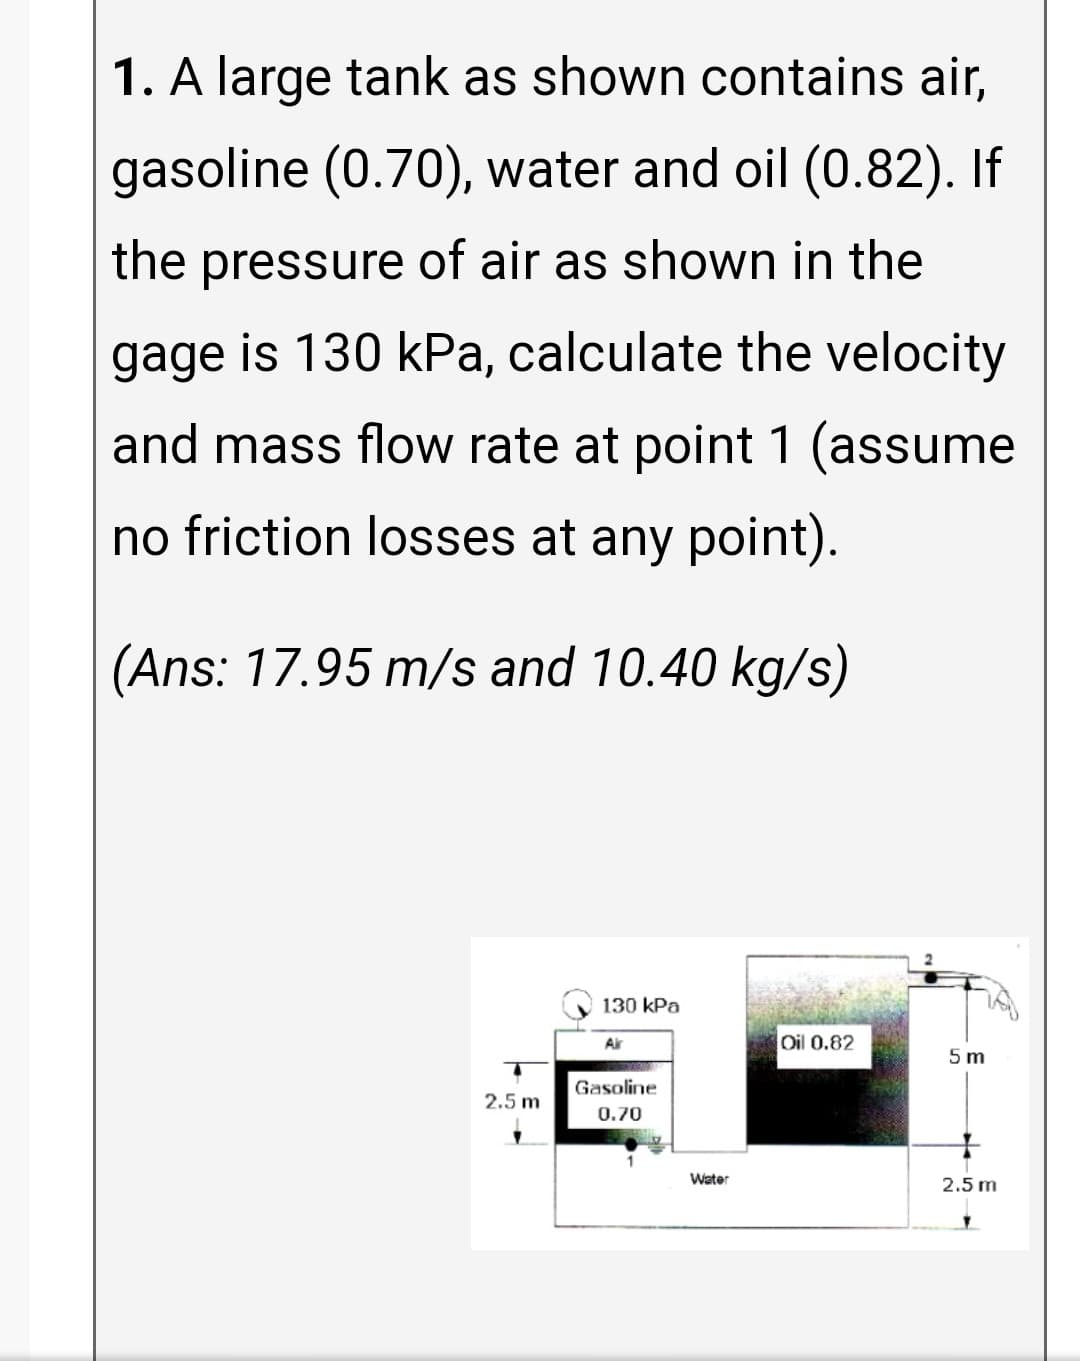 1. A large tank as shown contains air,
gasoline (0.70), water and oil (0.82). If
the pressure of air as shown in the
gage is 130 kPa, calculate the velocity
and mass flow rate at point 1 (assume
no friction losses at any point).
(Ans: 17.95 m/s and 10.40 kg/s)
130 kPa
Air
Oil 0.82
5 m
Gasoline
2.5 m
0.70
Water
2.5 m
